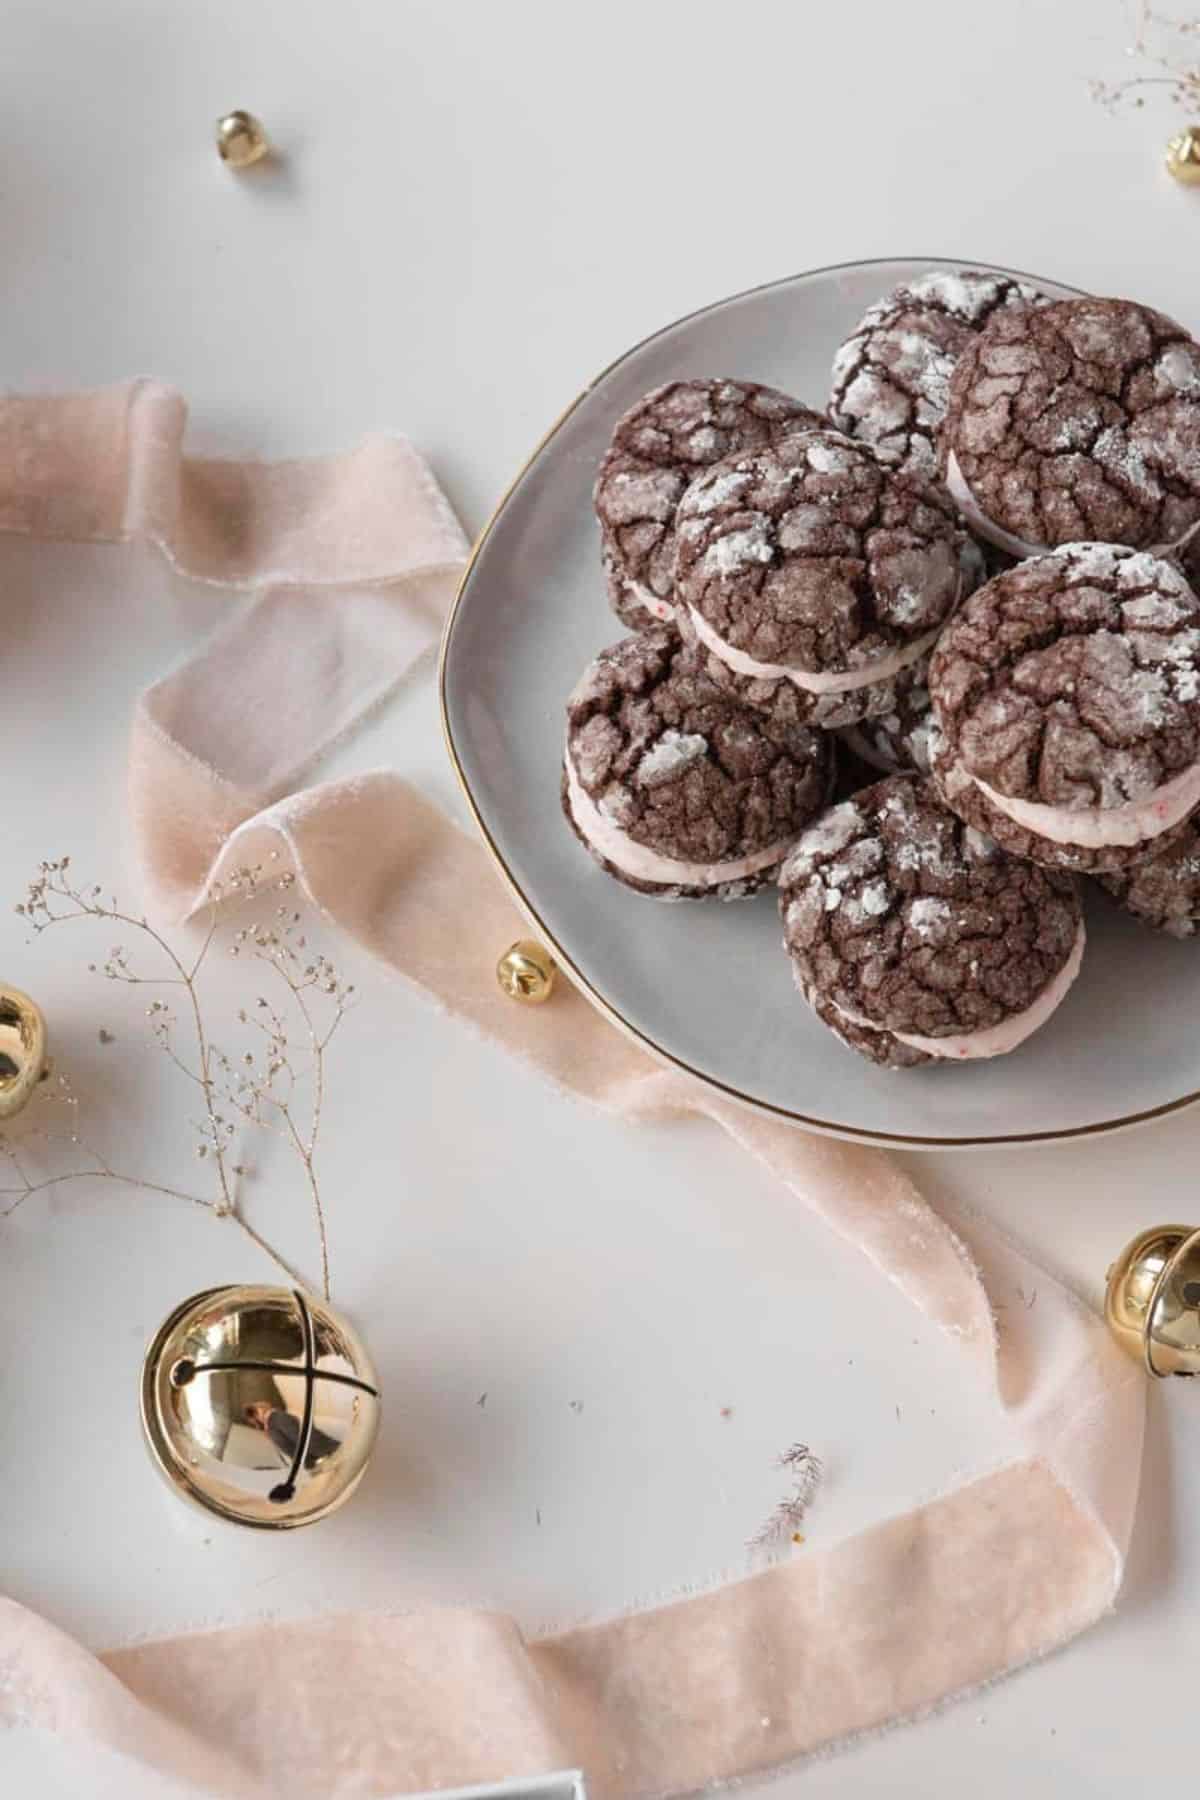 Chocolate crinkle cookies with peppermint buttercream filling on plate